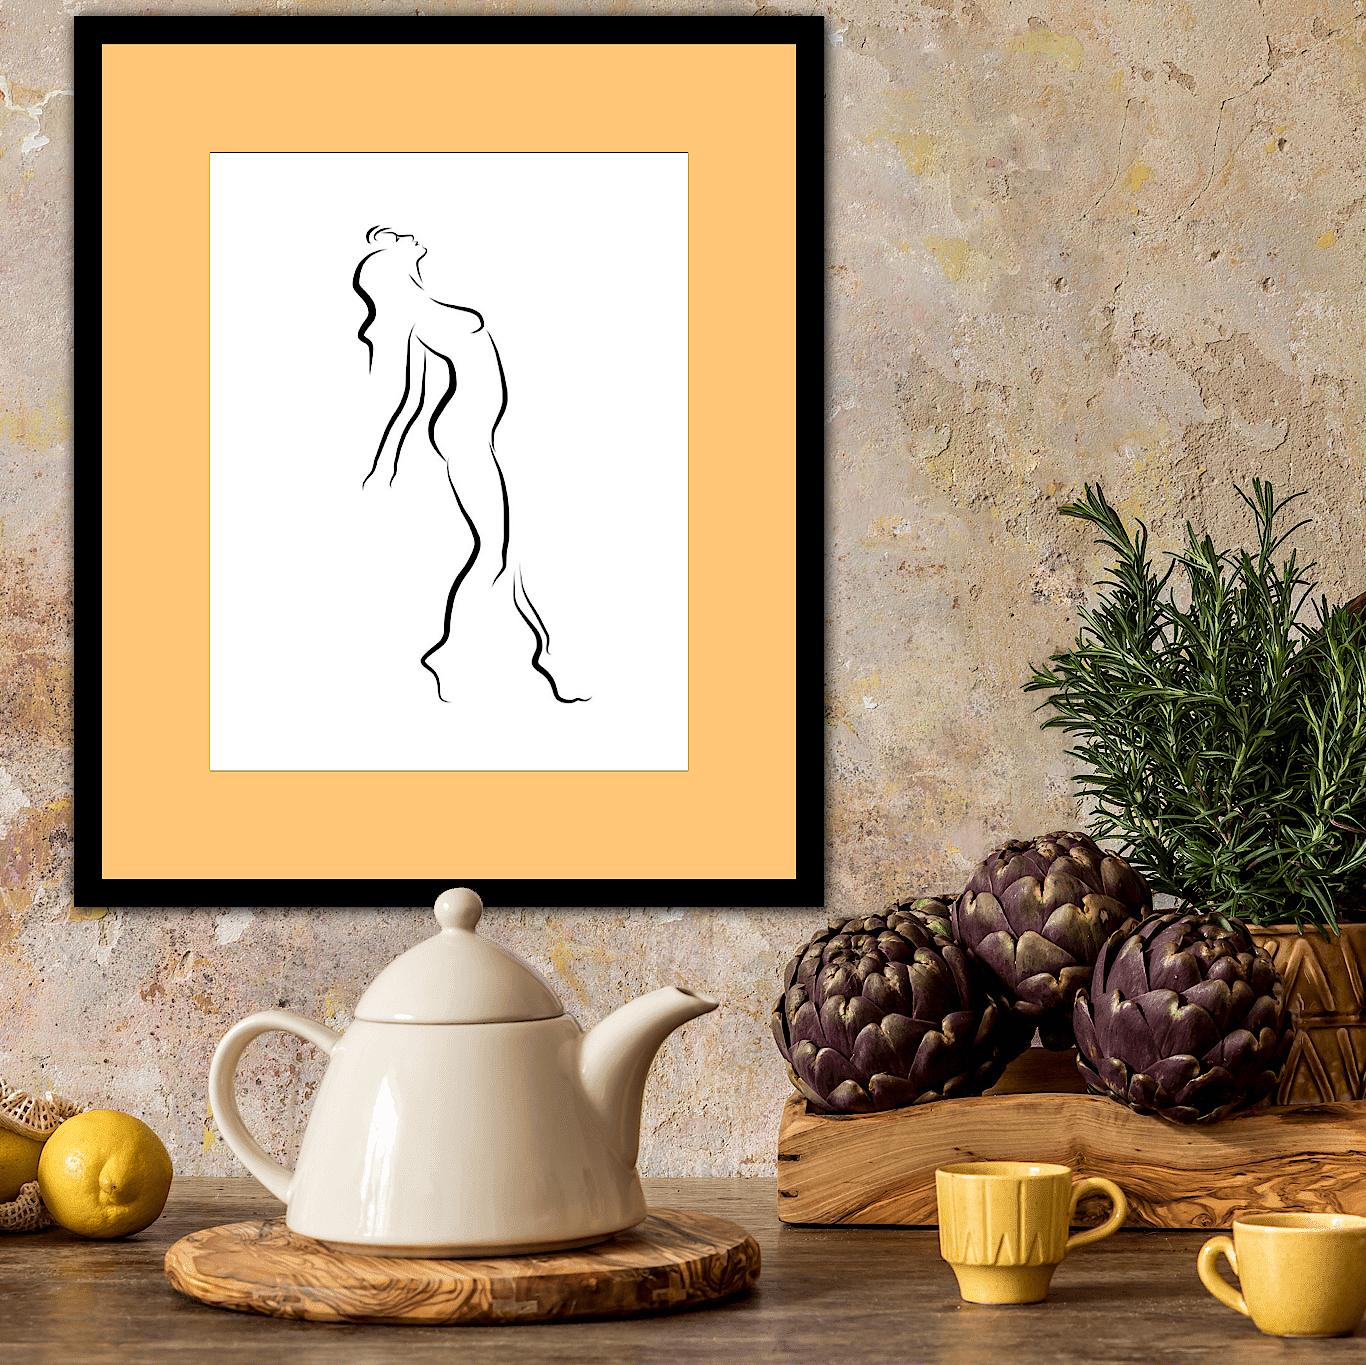 Haiku #27, 1/50 - Digital Vector Drawing Leaning Female Nude Woman Figure Table

This is a limited edition (50) digital black & white print of a standing female nude, executed in 17 vector lines. It is part of a series called Haiku, after the style